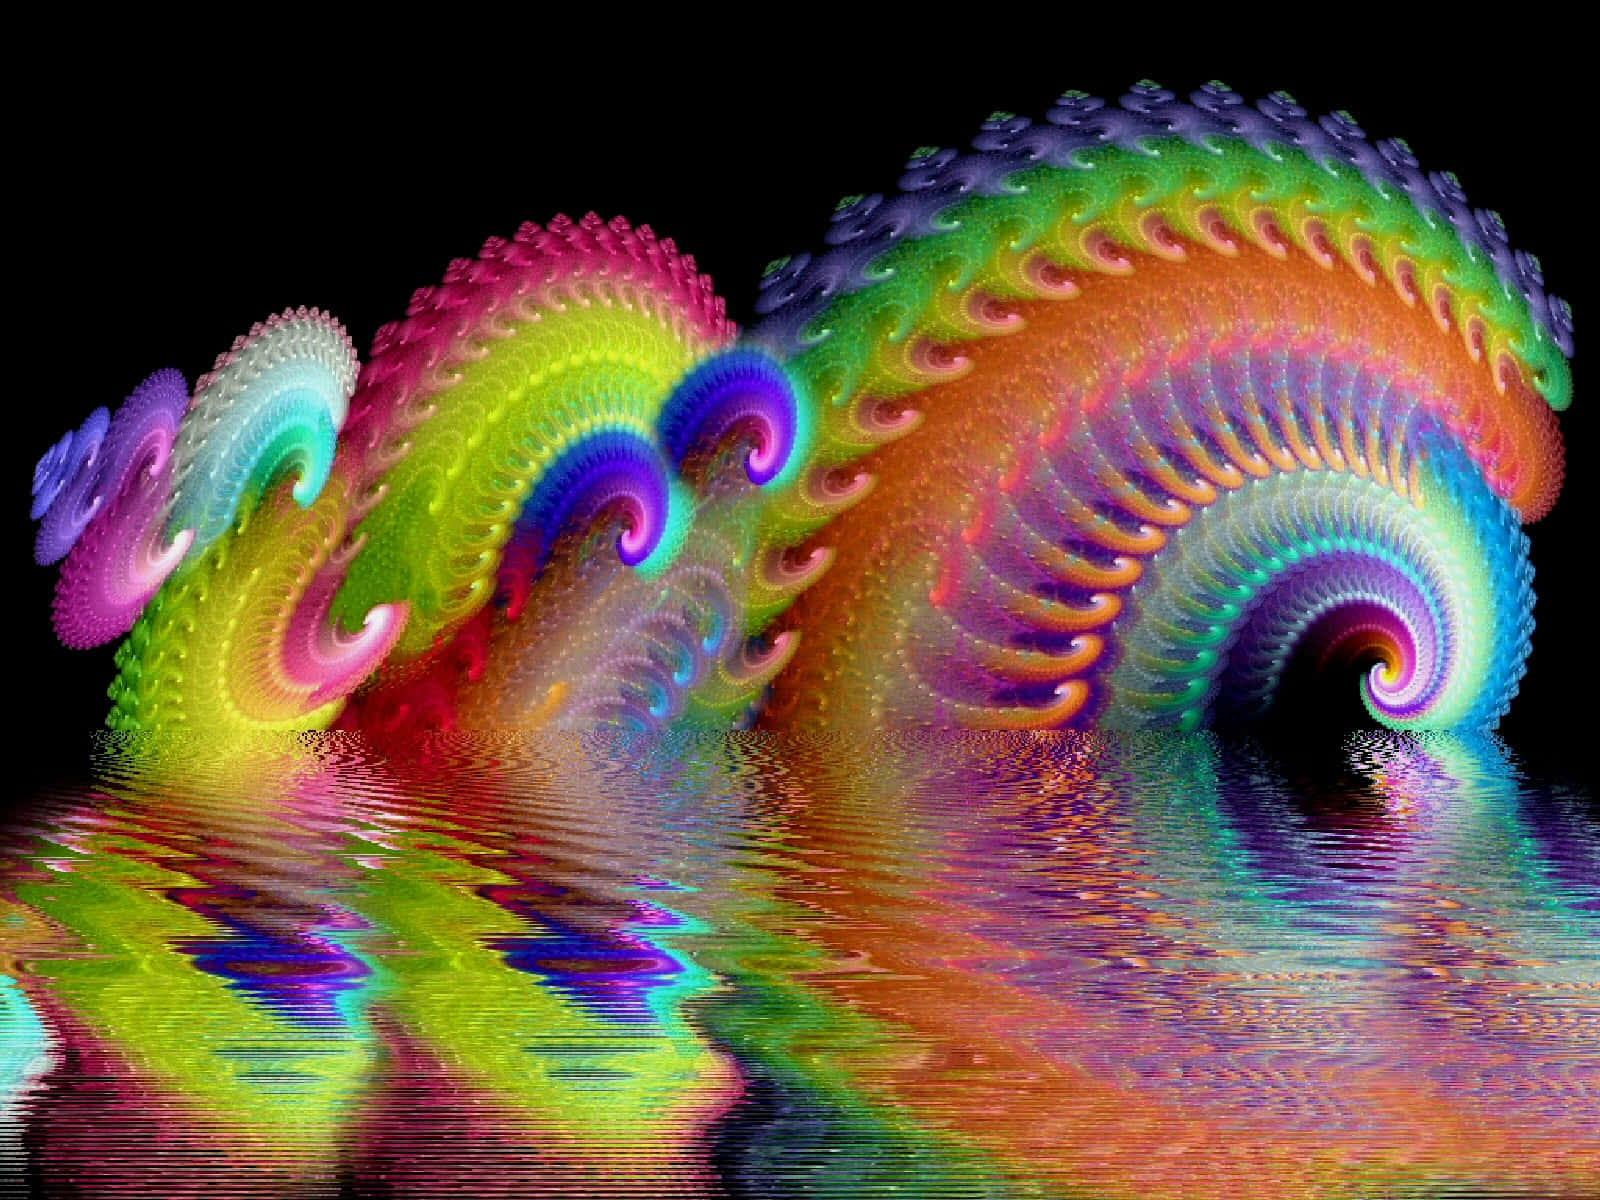 Dive deeper into your imagination and exploration with psychedelic visuals